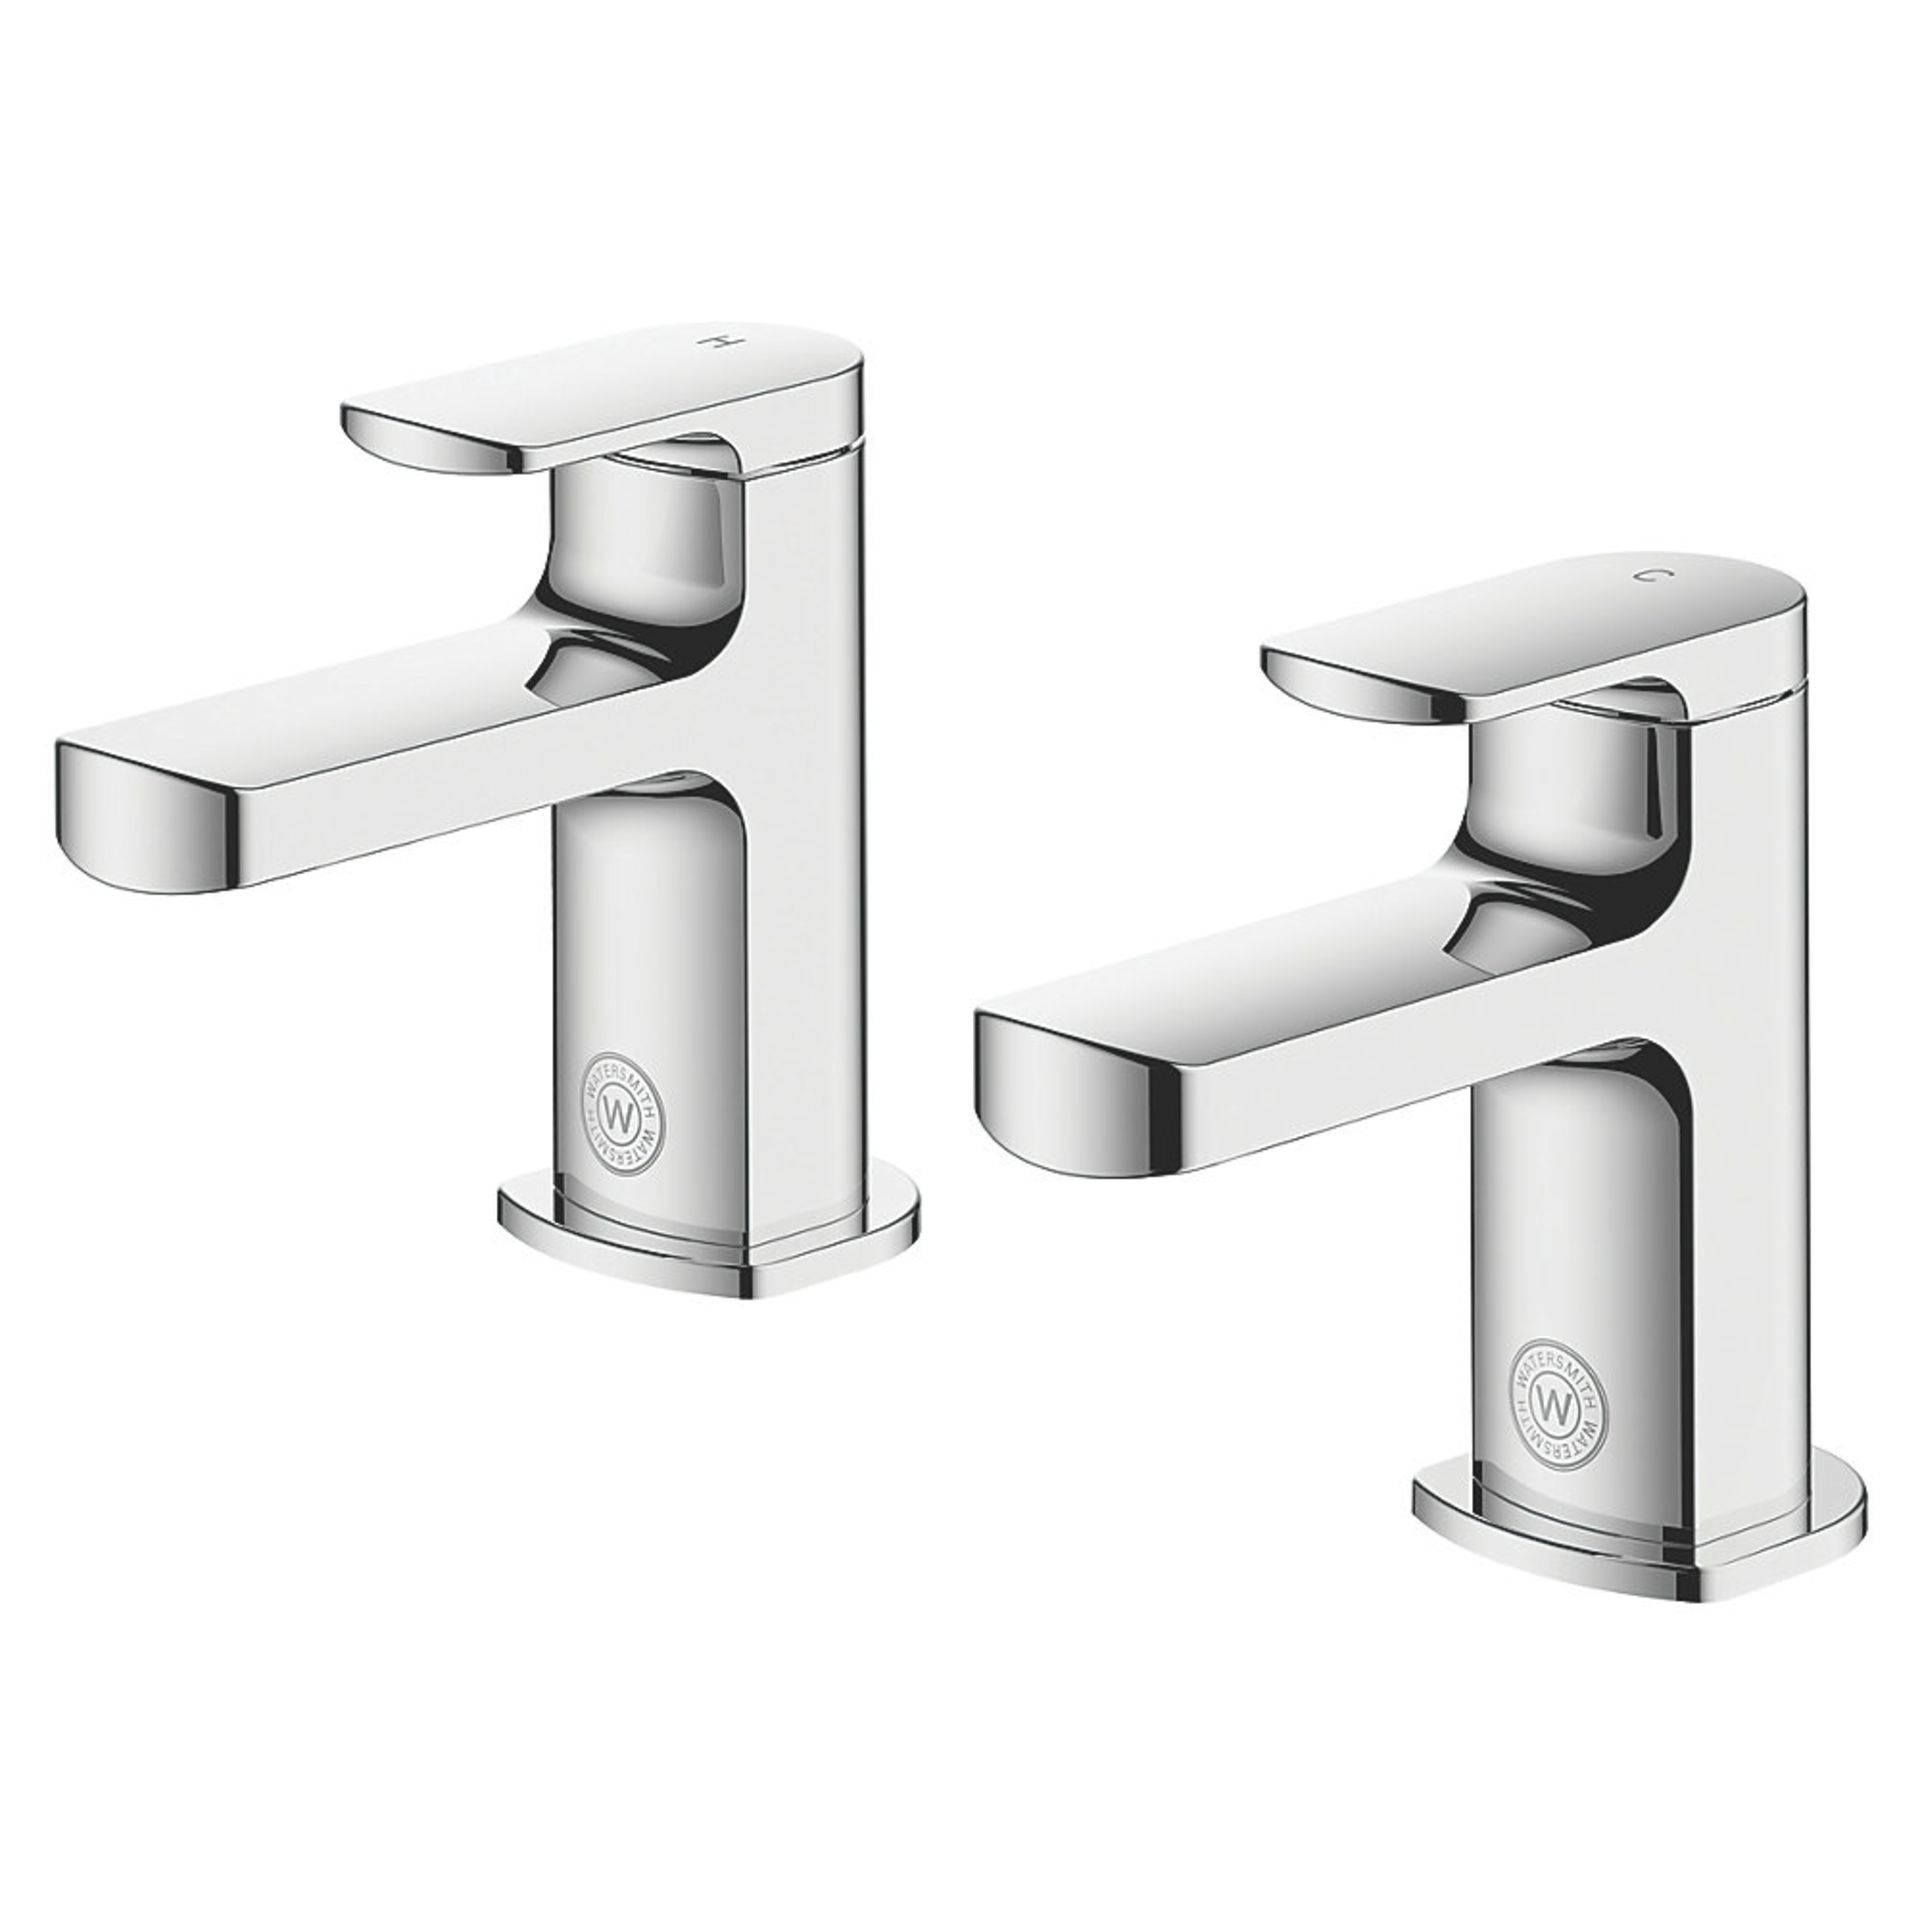 (XX129) Heritage Clyde Bath taps Pair. _ turn operation. Chrome-plated brass. Combines contemp...